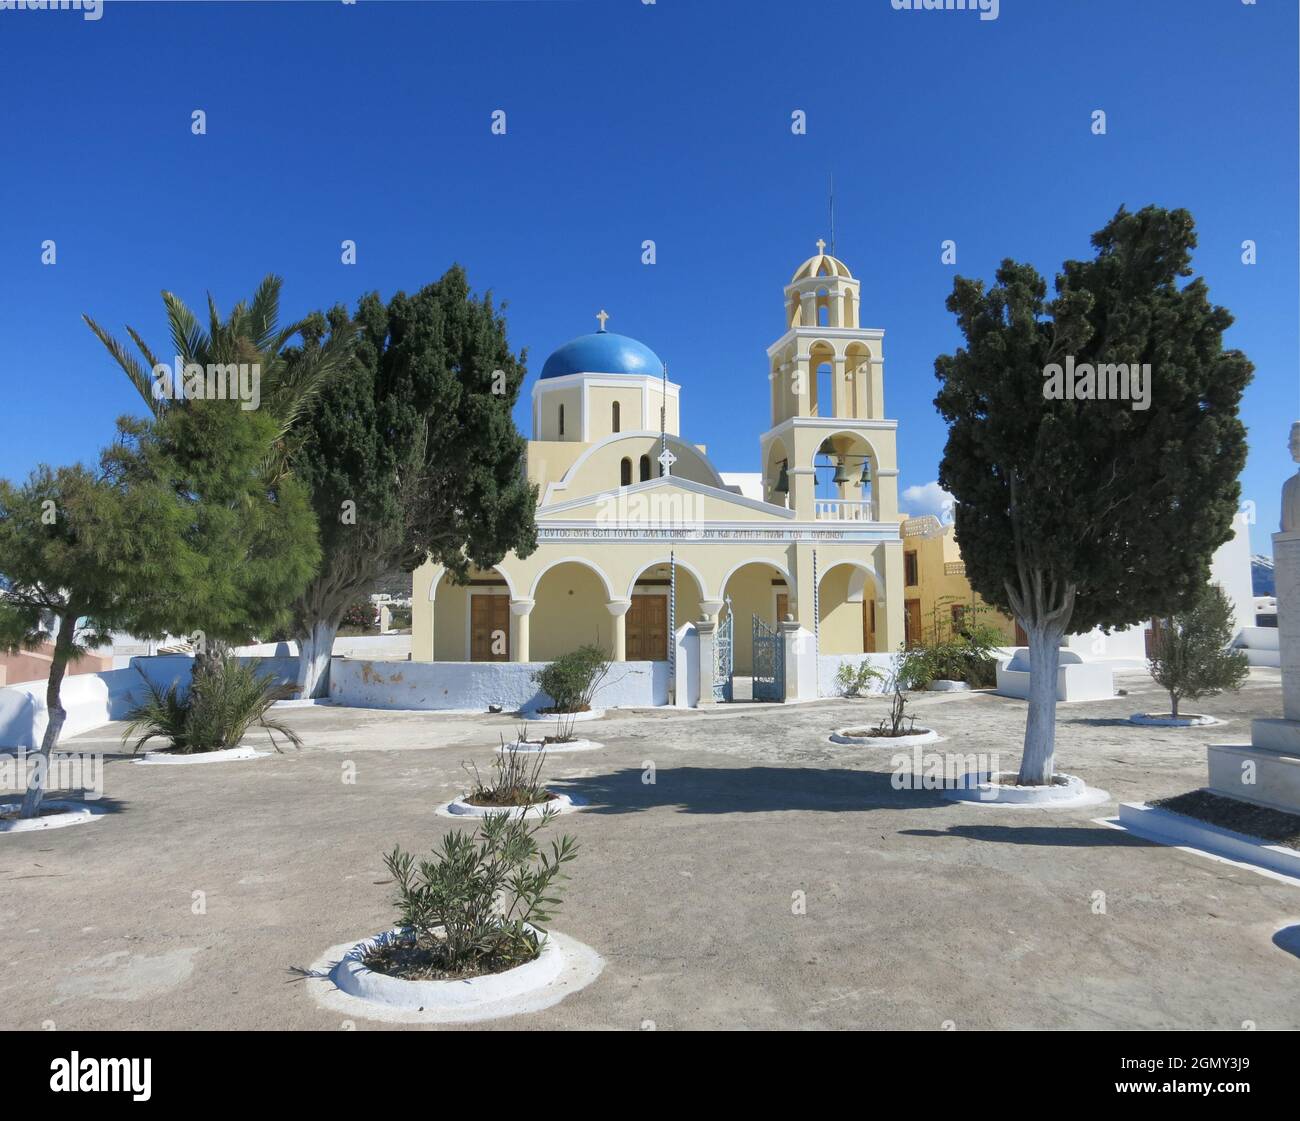 The Church of Saint George in Perivolas (also known as the church of Apanomeritis) is one of the most famous churches in Oia. Stock Photo